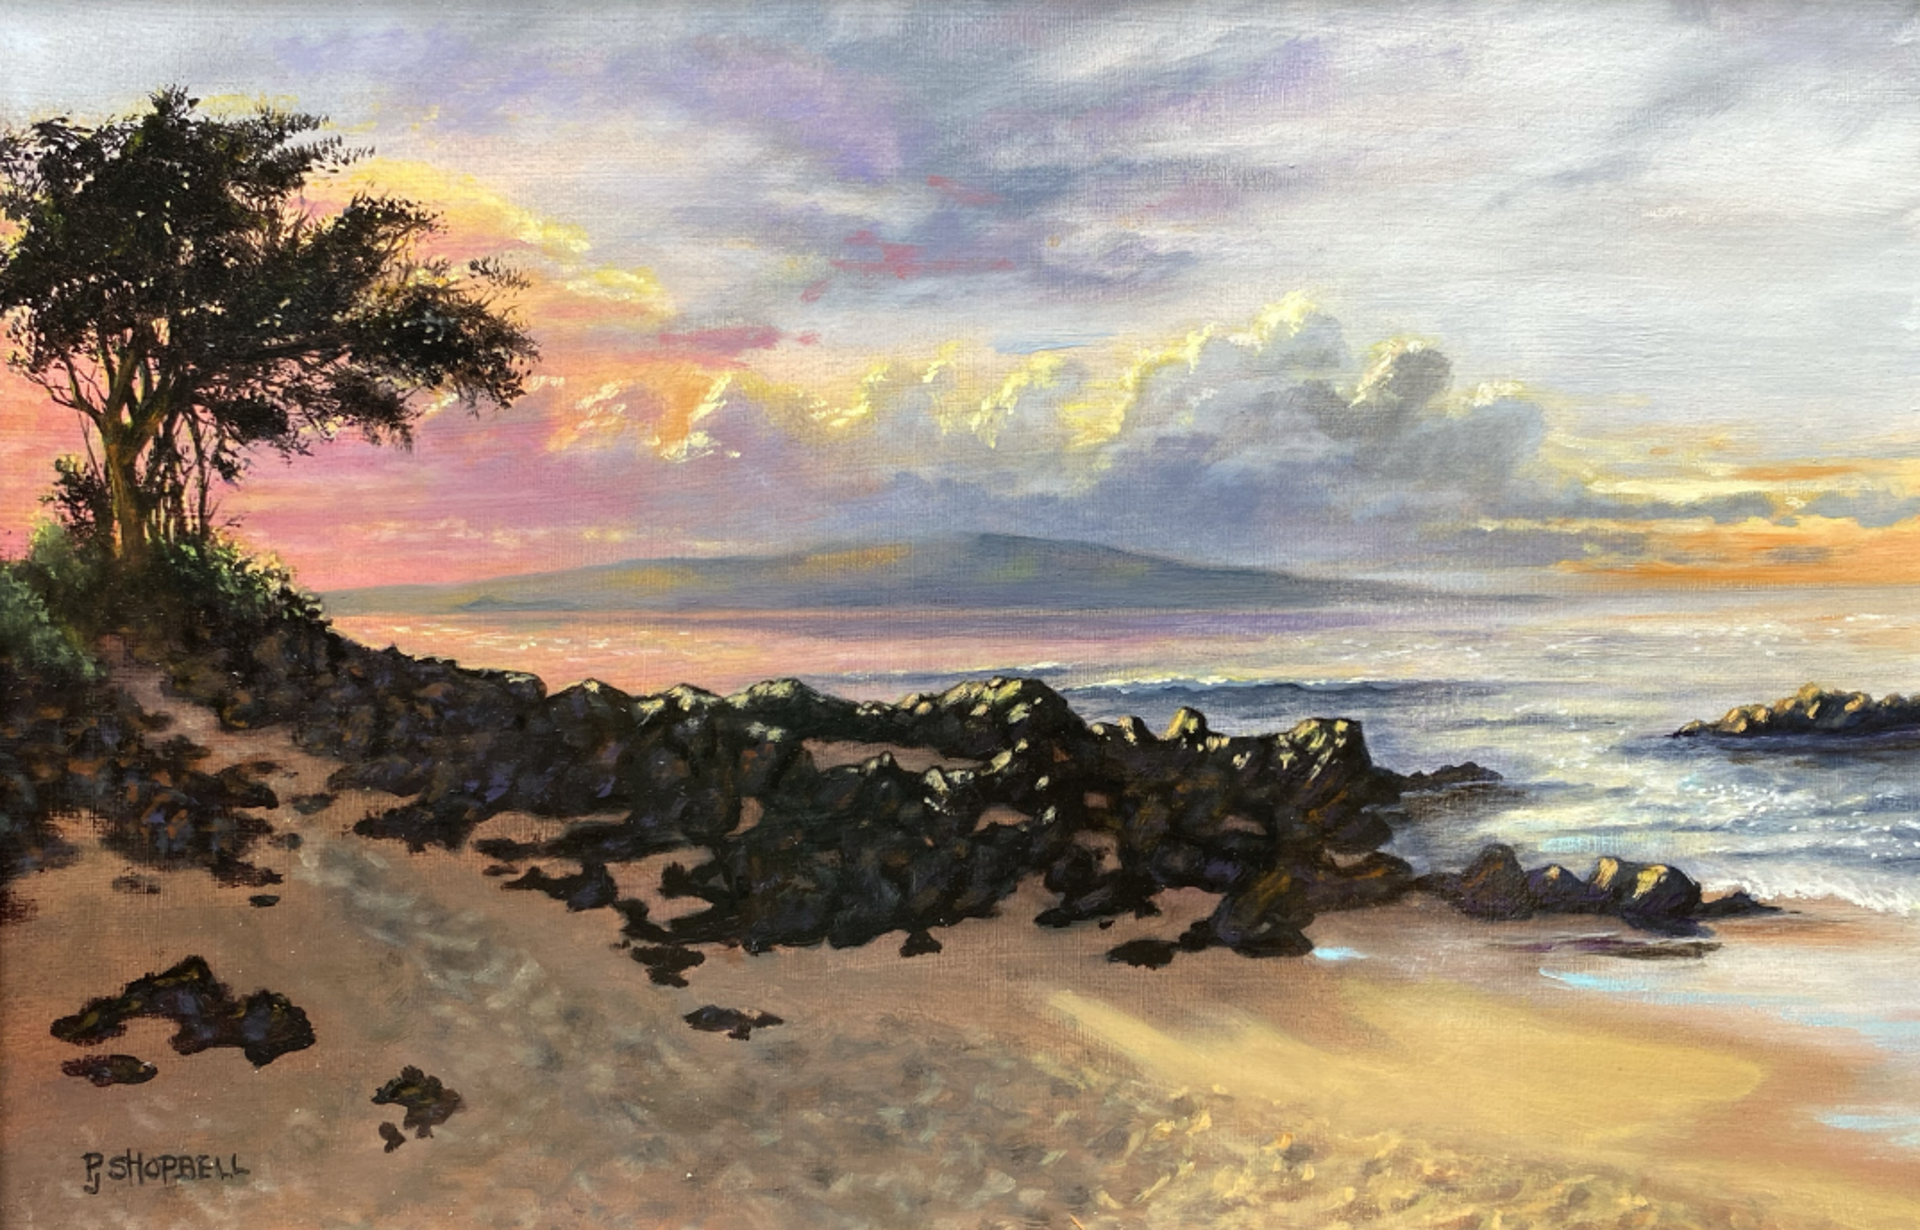 Clouds over Kahoʻolawe by PJ Shopbell